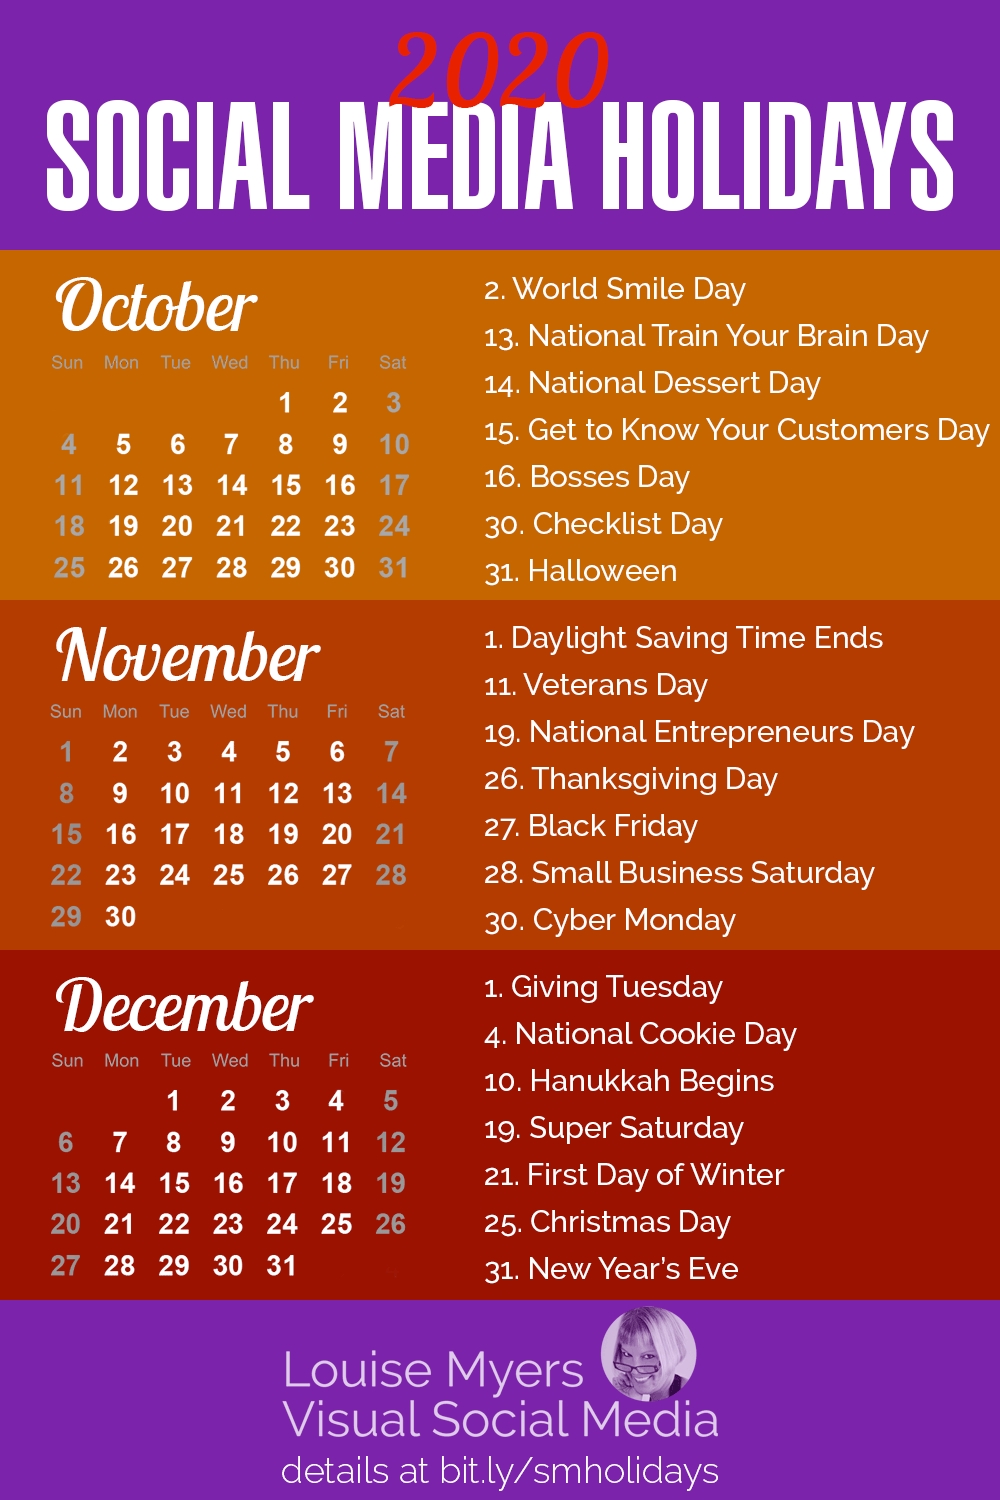 100+ Social Media Holidays You Need In 2020-21: Indispensable!